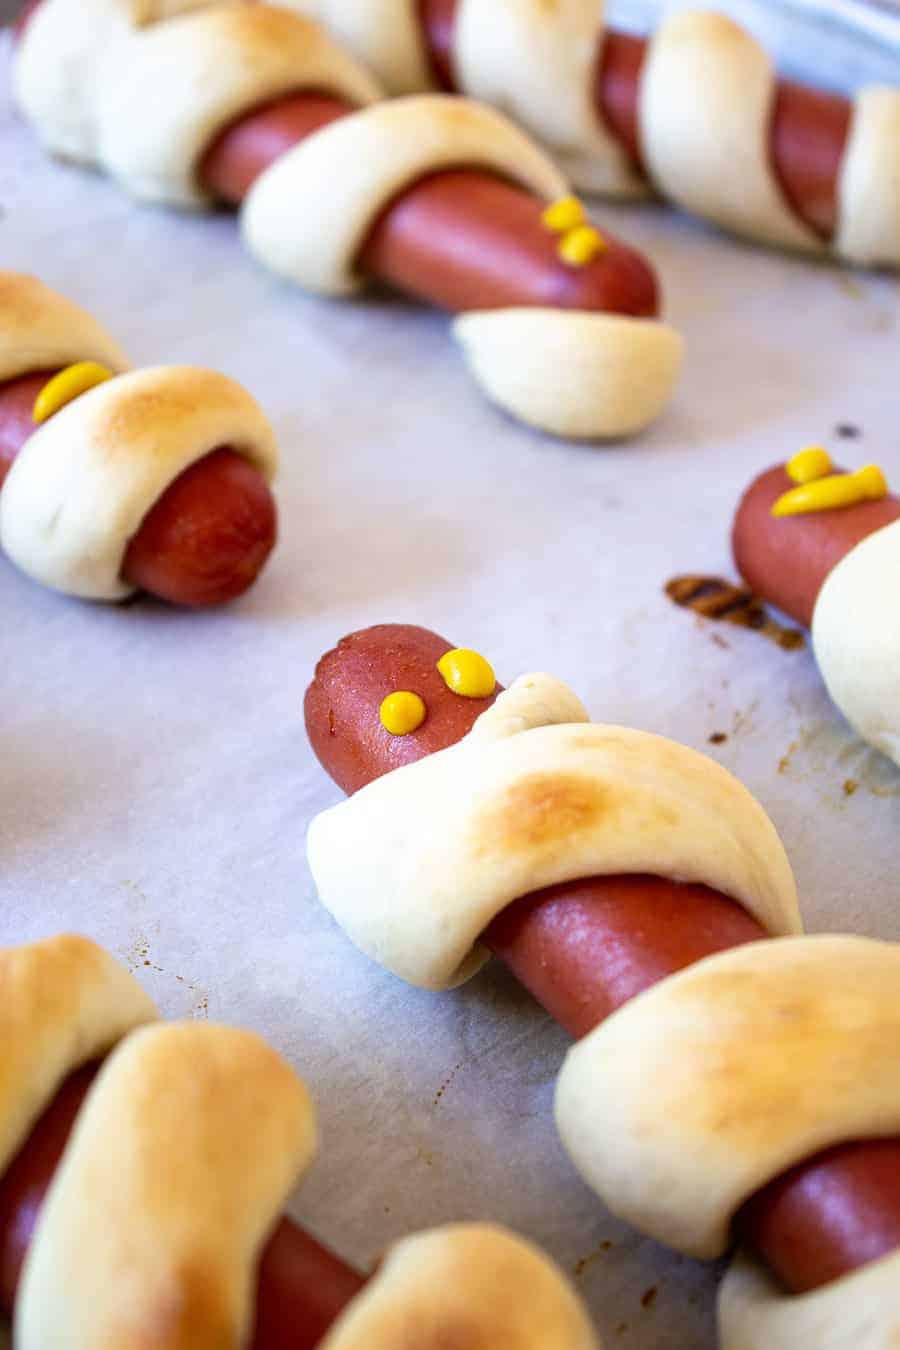 Hot dogs with mustard eyes.